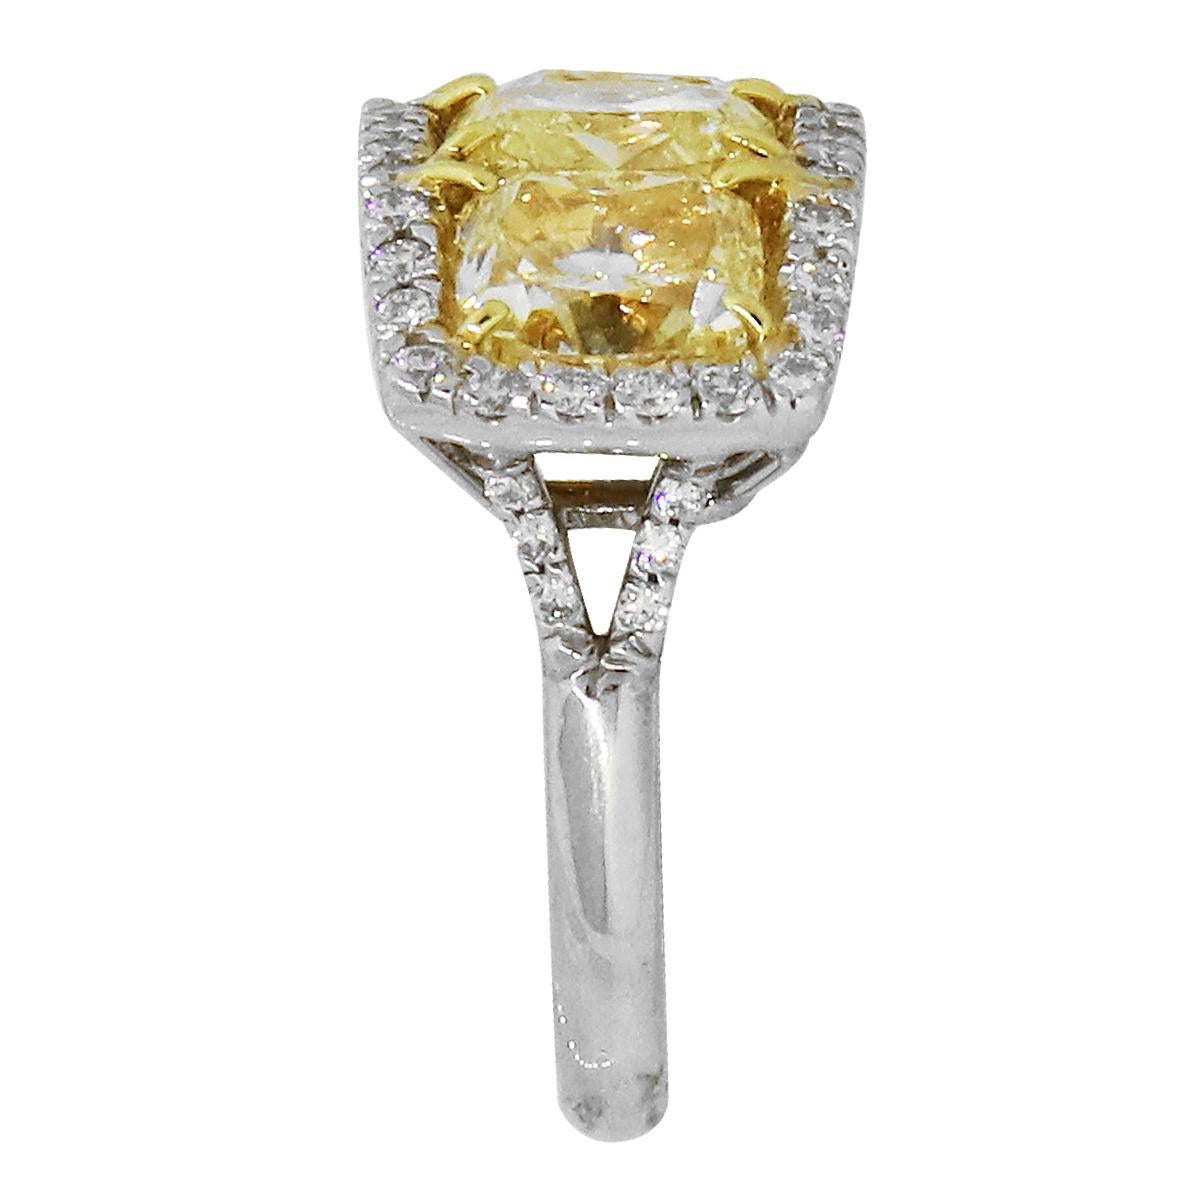 Material: 18k Yellow Gold and Platinum
Diamond Details: Approximately 6.83ctw Cushion cut diamonds and Approximately 0.54ctw Round Brilliant Diamonds. Round Diamonds are G/H in color and SI in clarity 
Ring Size: 6.5
Total Weight: 12.1g